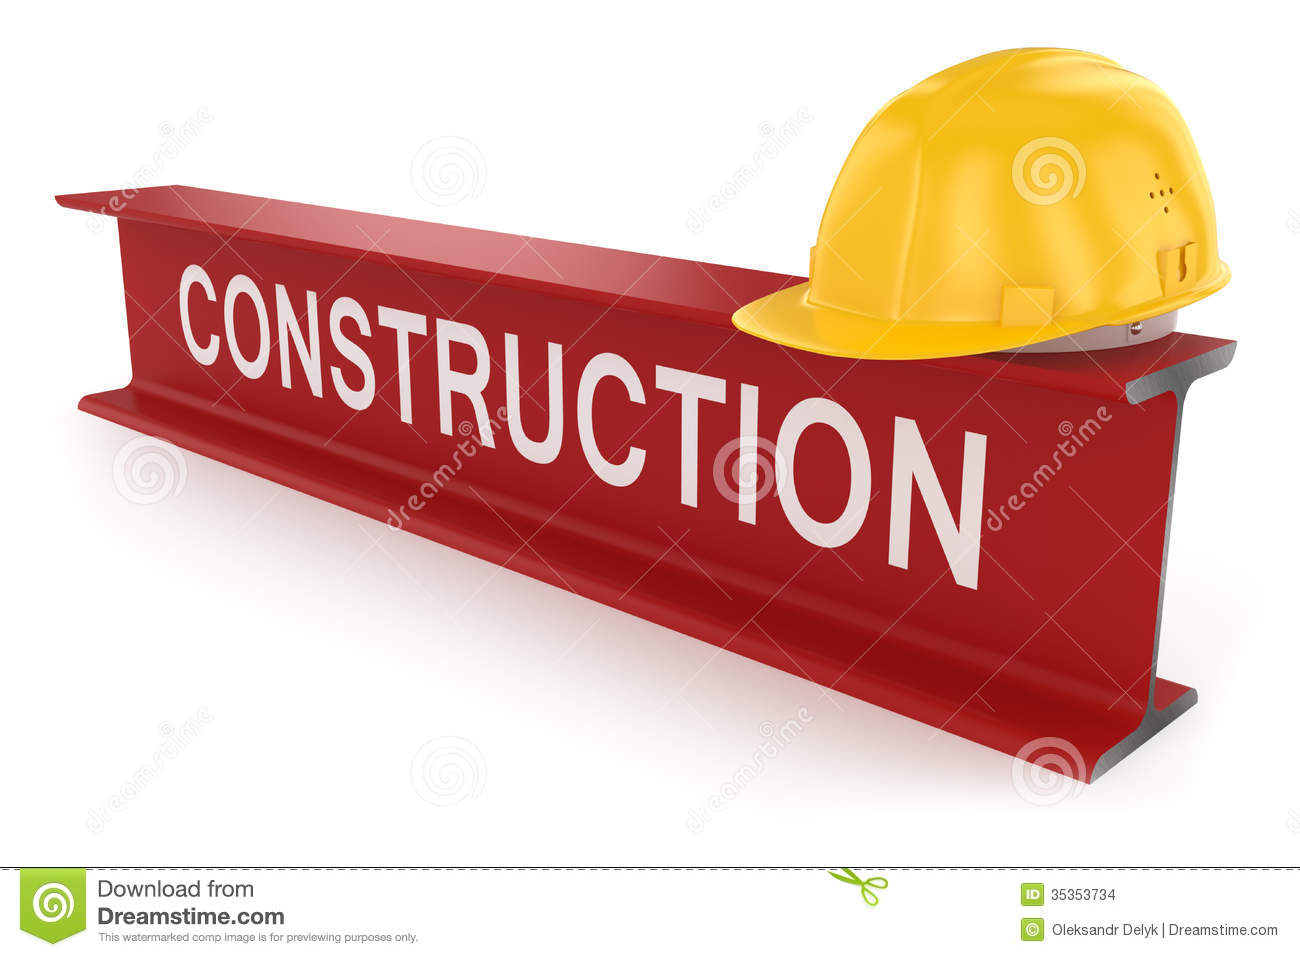 Metal Beam And Helmet  Construction Concept  Stock Images   Image    